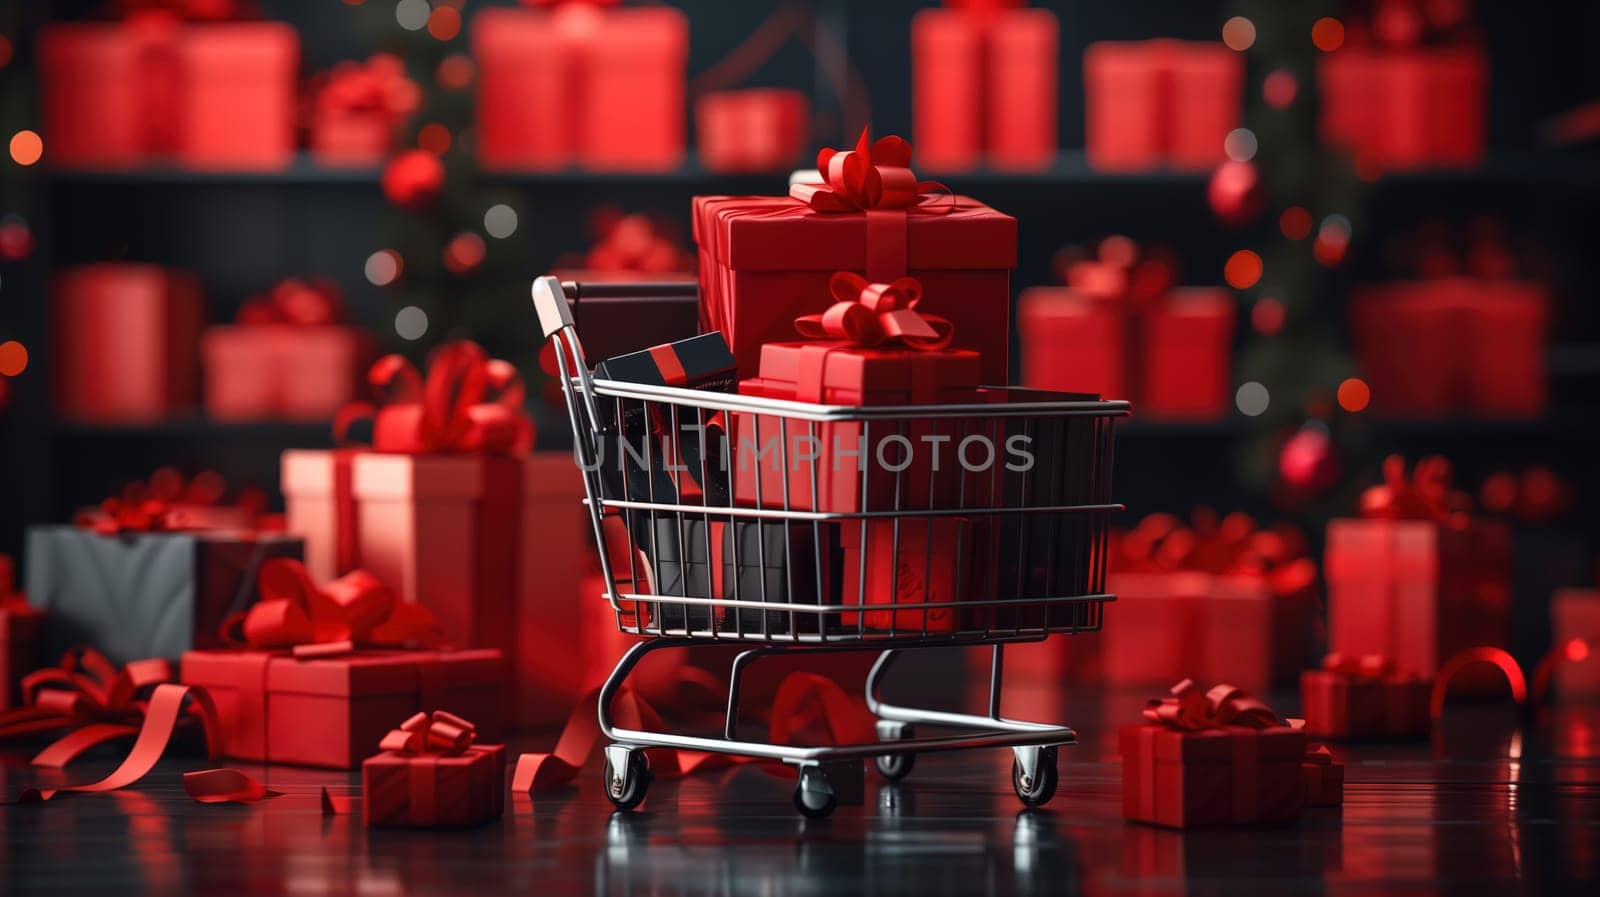 Shopping Cart Filled With Presents by Christmas Tree by TRMK